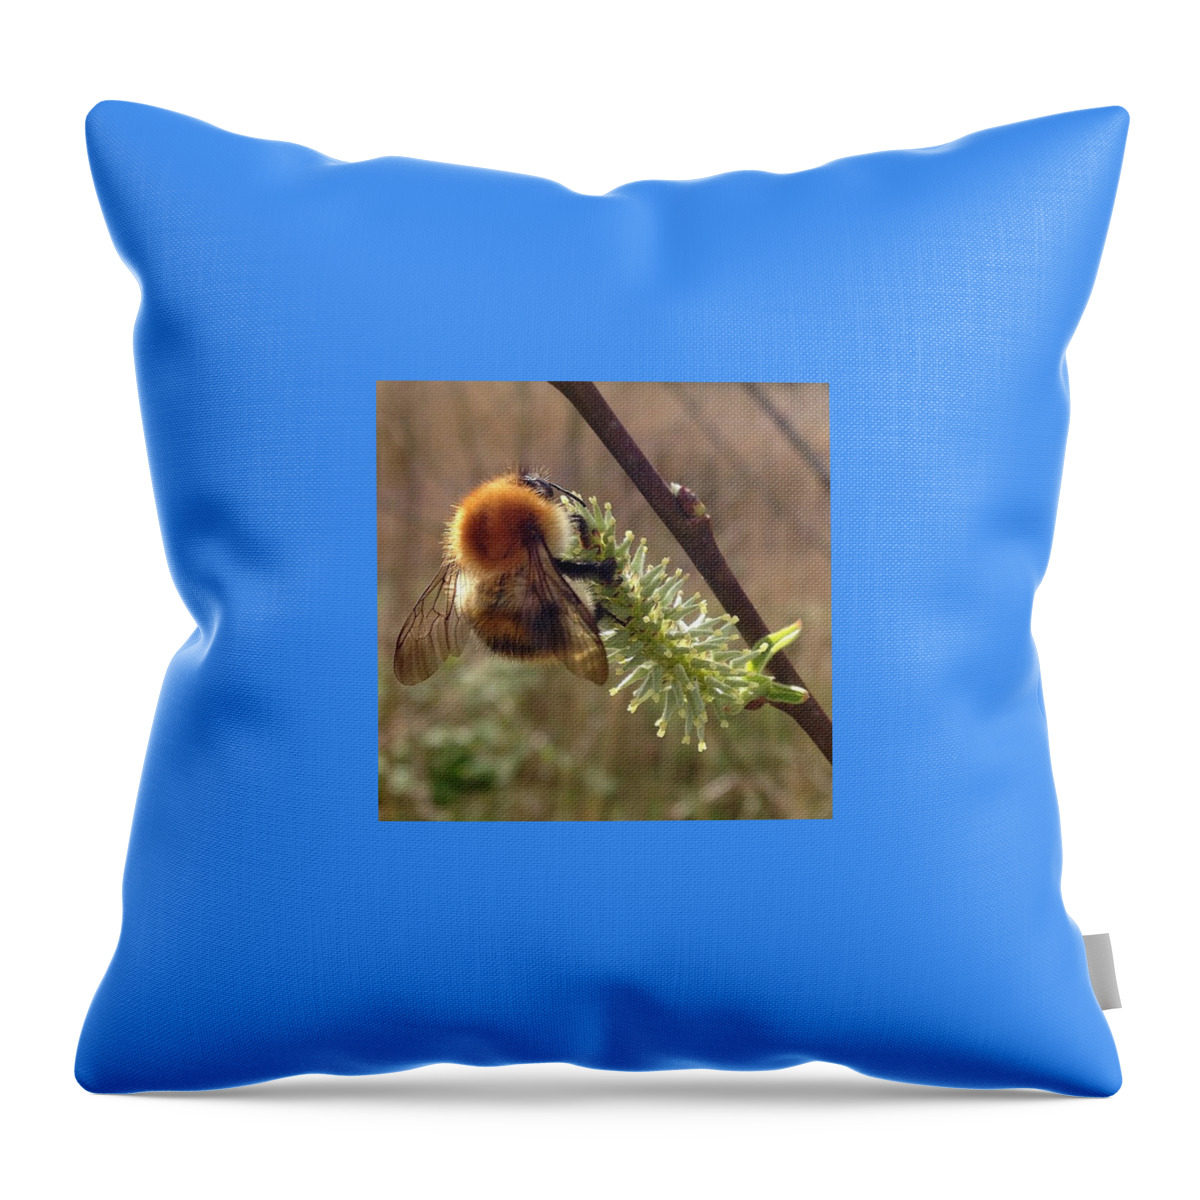 Reflection Throw Pillow featuring the photograph Reflection by Grace Smith